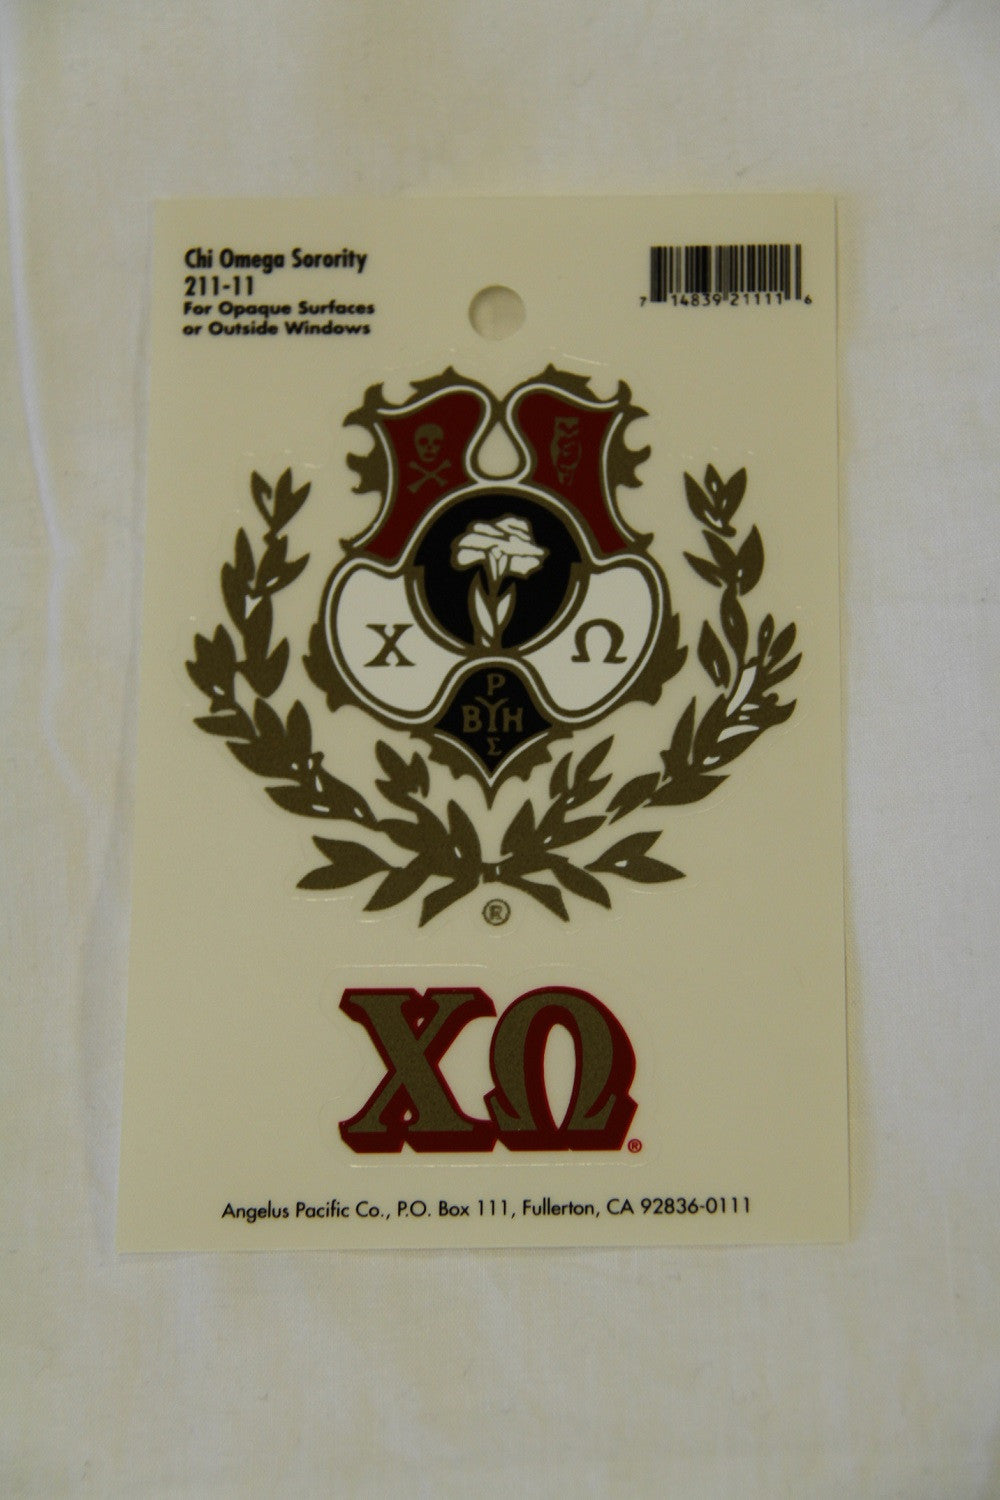 Chi Omega Decal Sticker